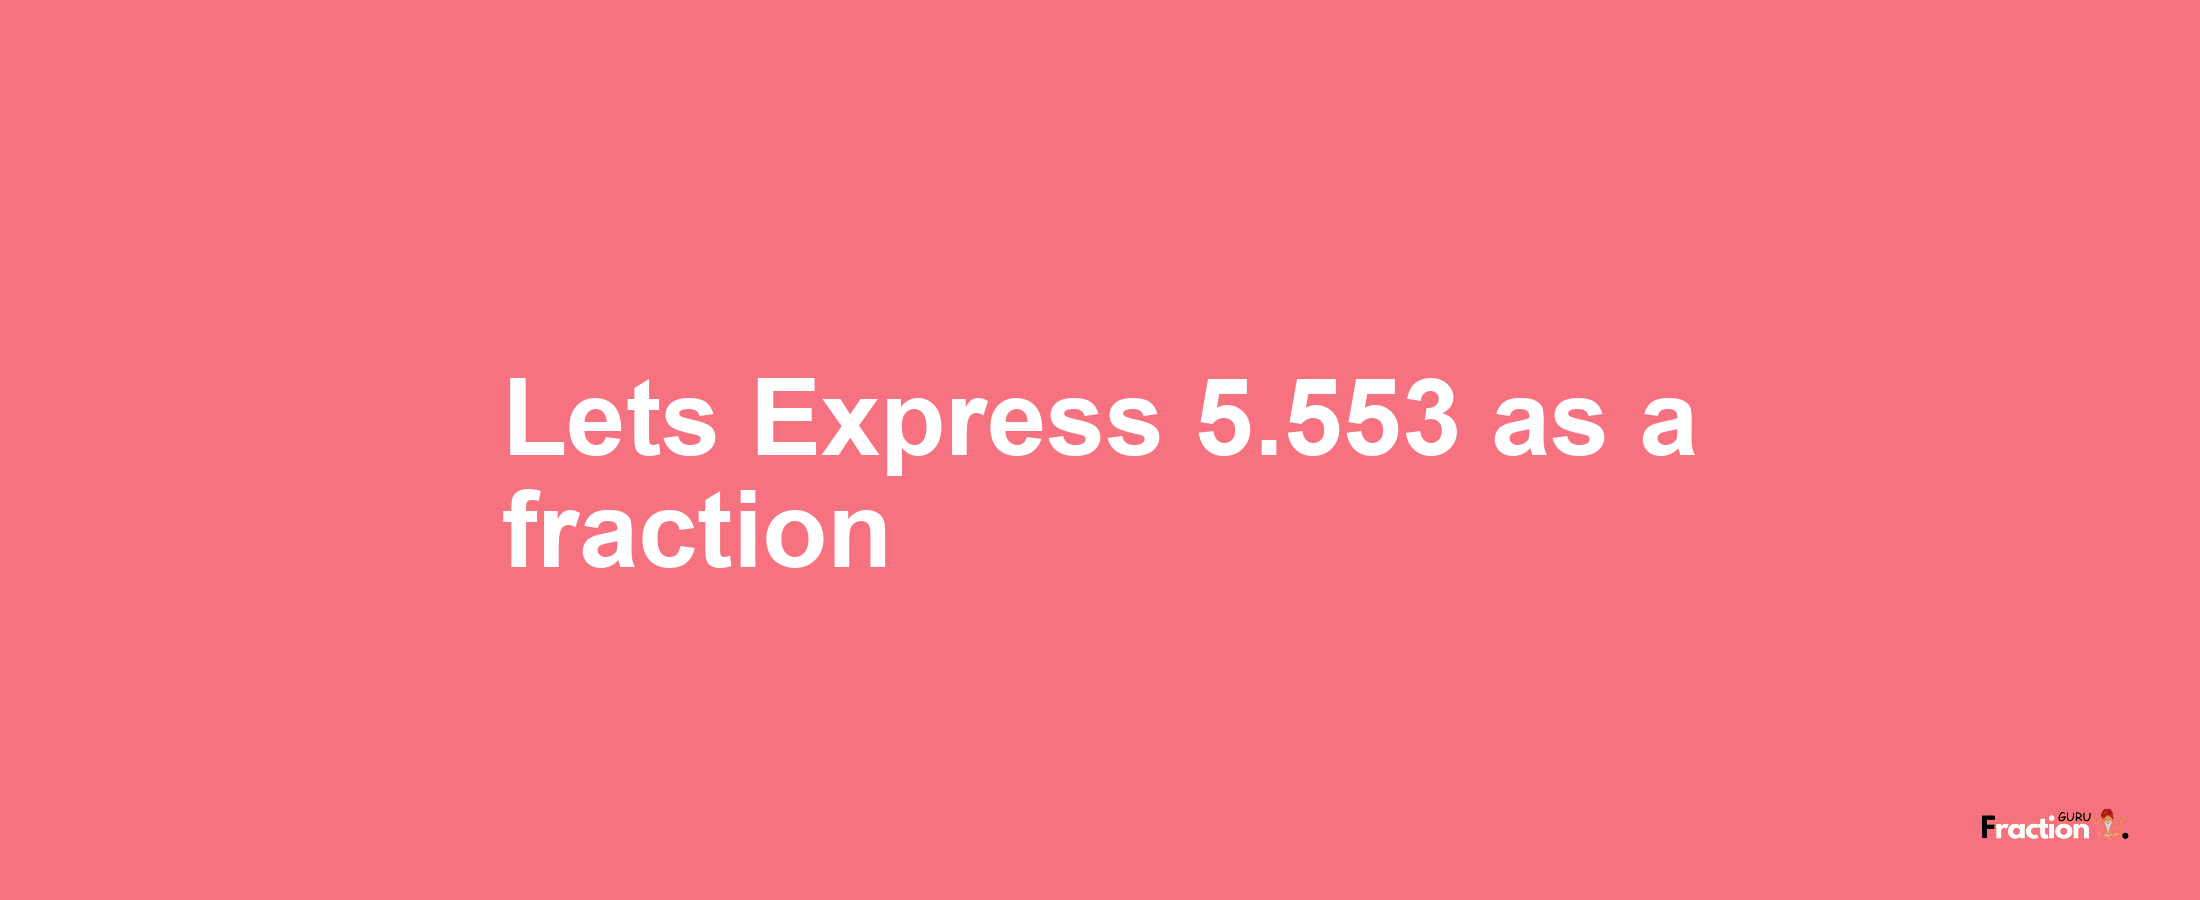 Lets Express 5.553 as afraction